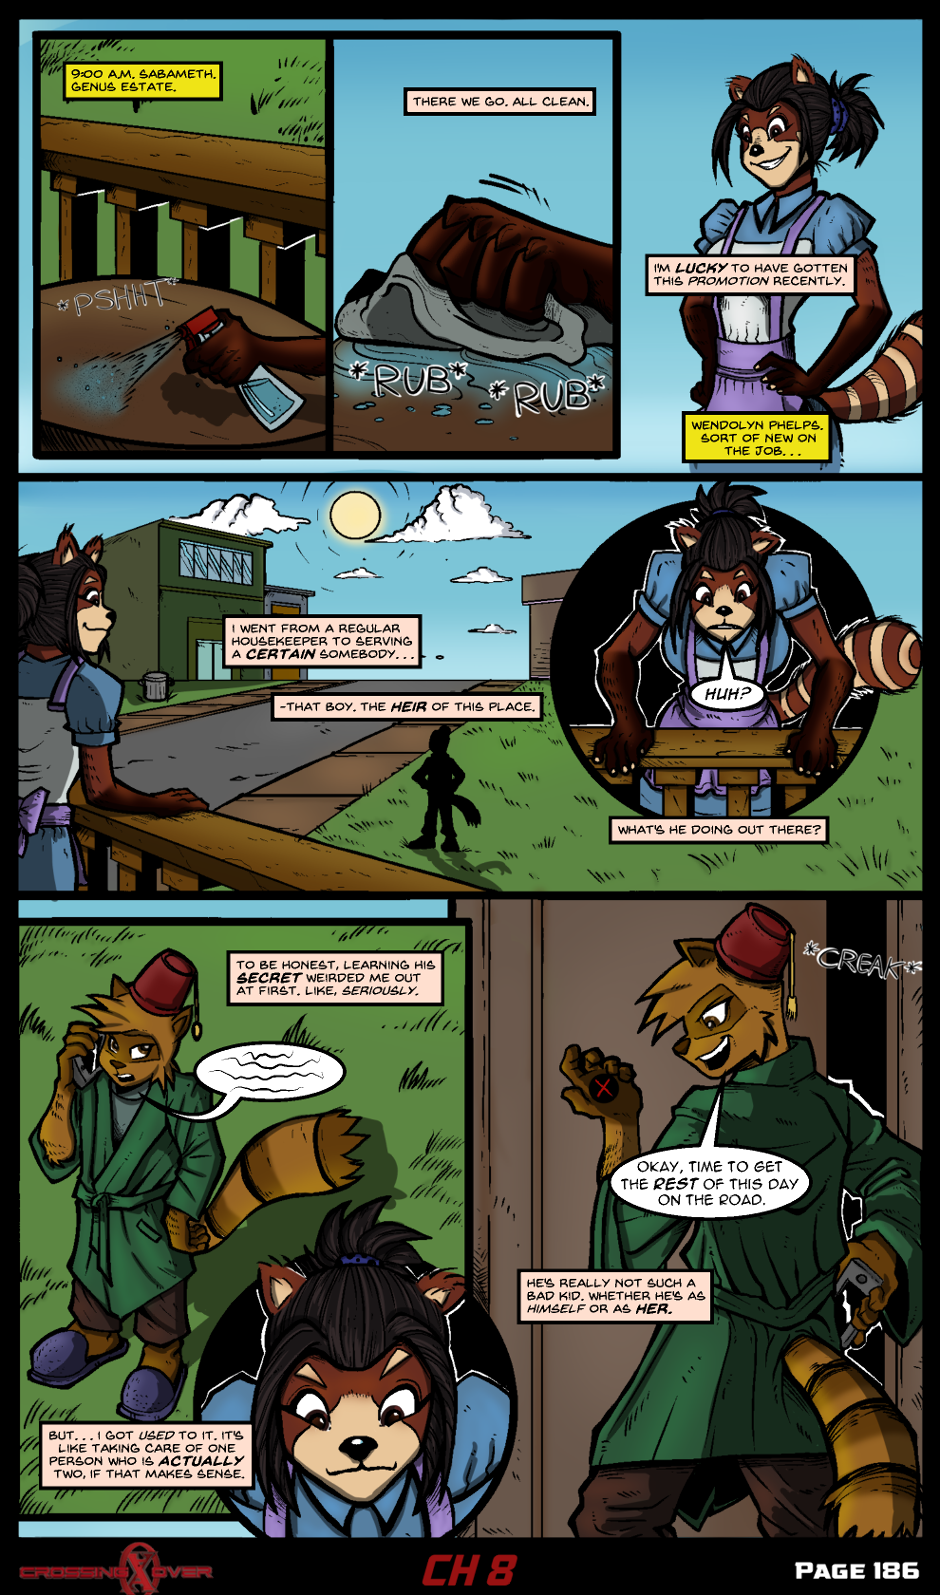 Page 186 (Ch 8)